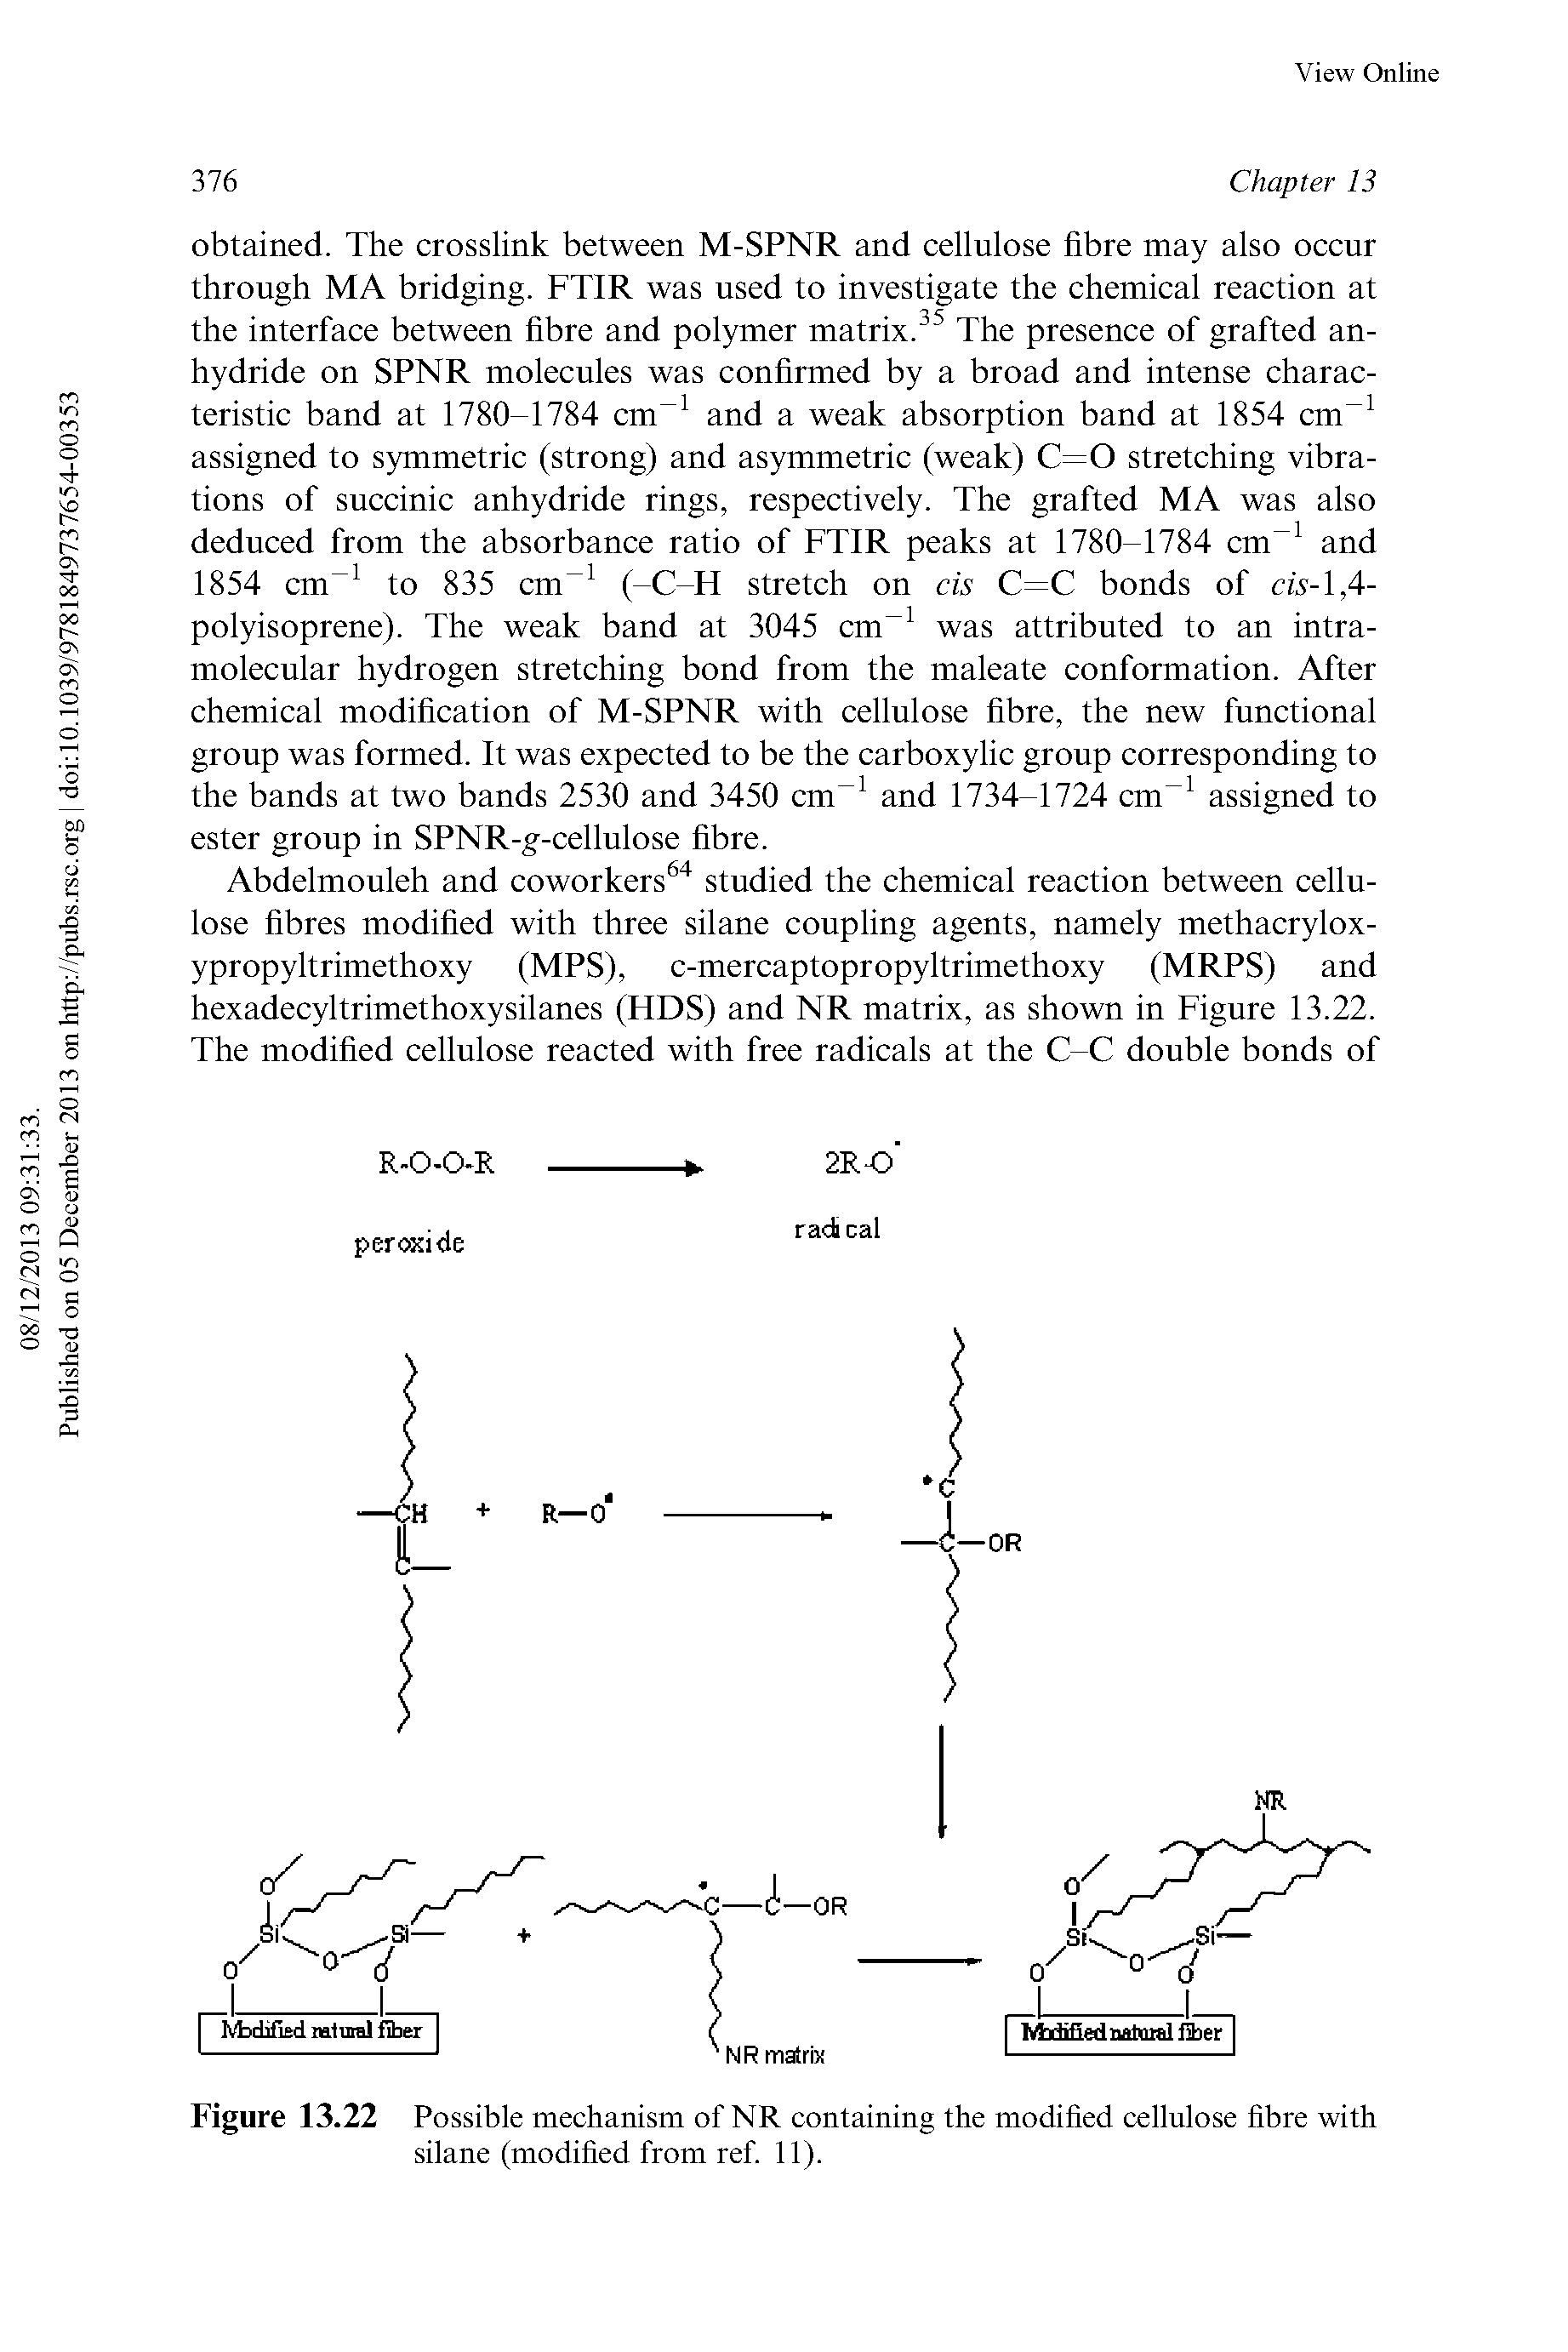 Figure 13.22 Possible mechanism of NR containing the modified cellulose fibre with silane (modified from ref. 11).